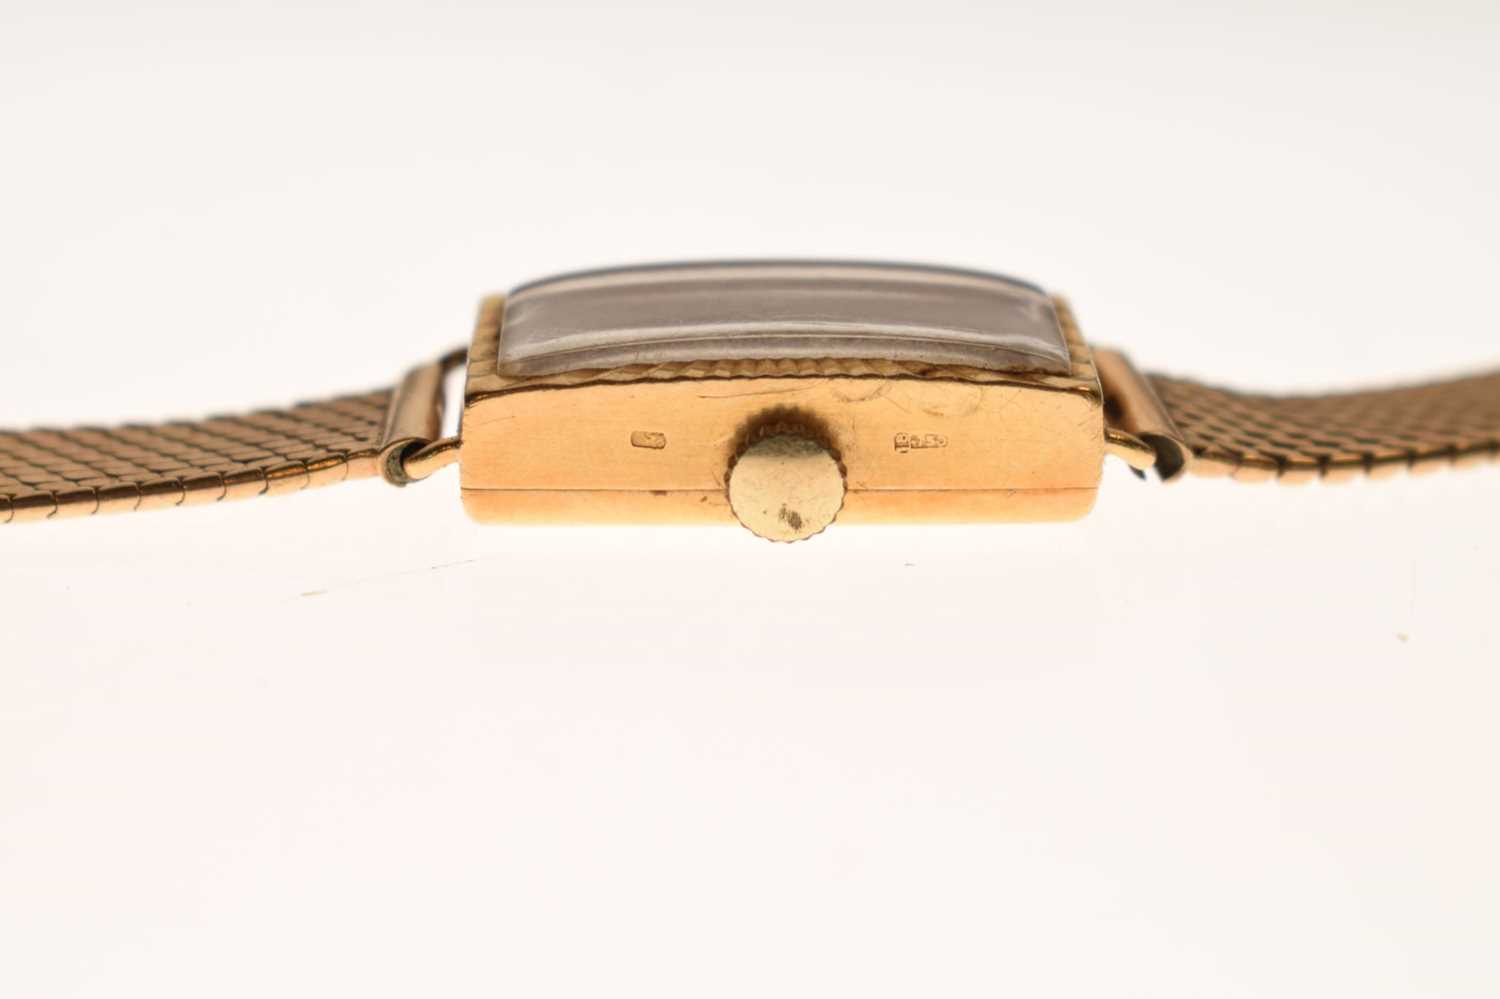 Watches of Switzerland - Lady's 18ct gold cased bracelet watch - Image 4 of 9